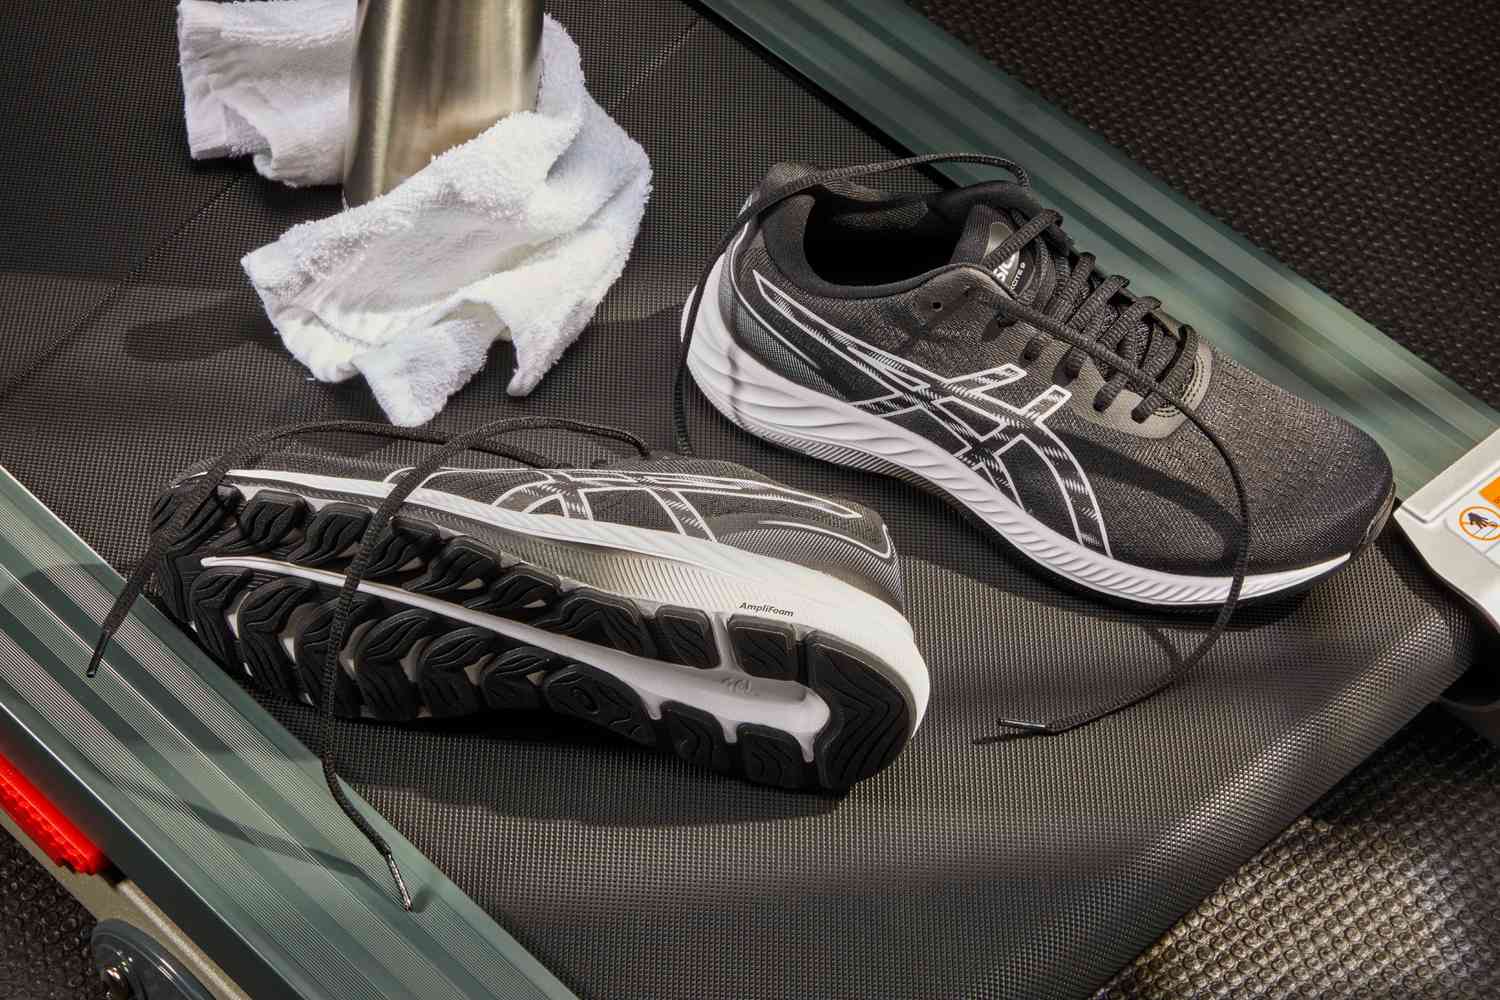 Asics Gel-Excite 9 Women's Running Shoe displayed on treadmill with a towel